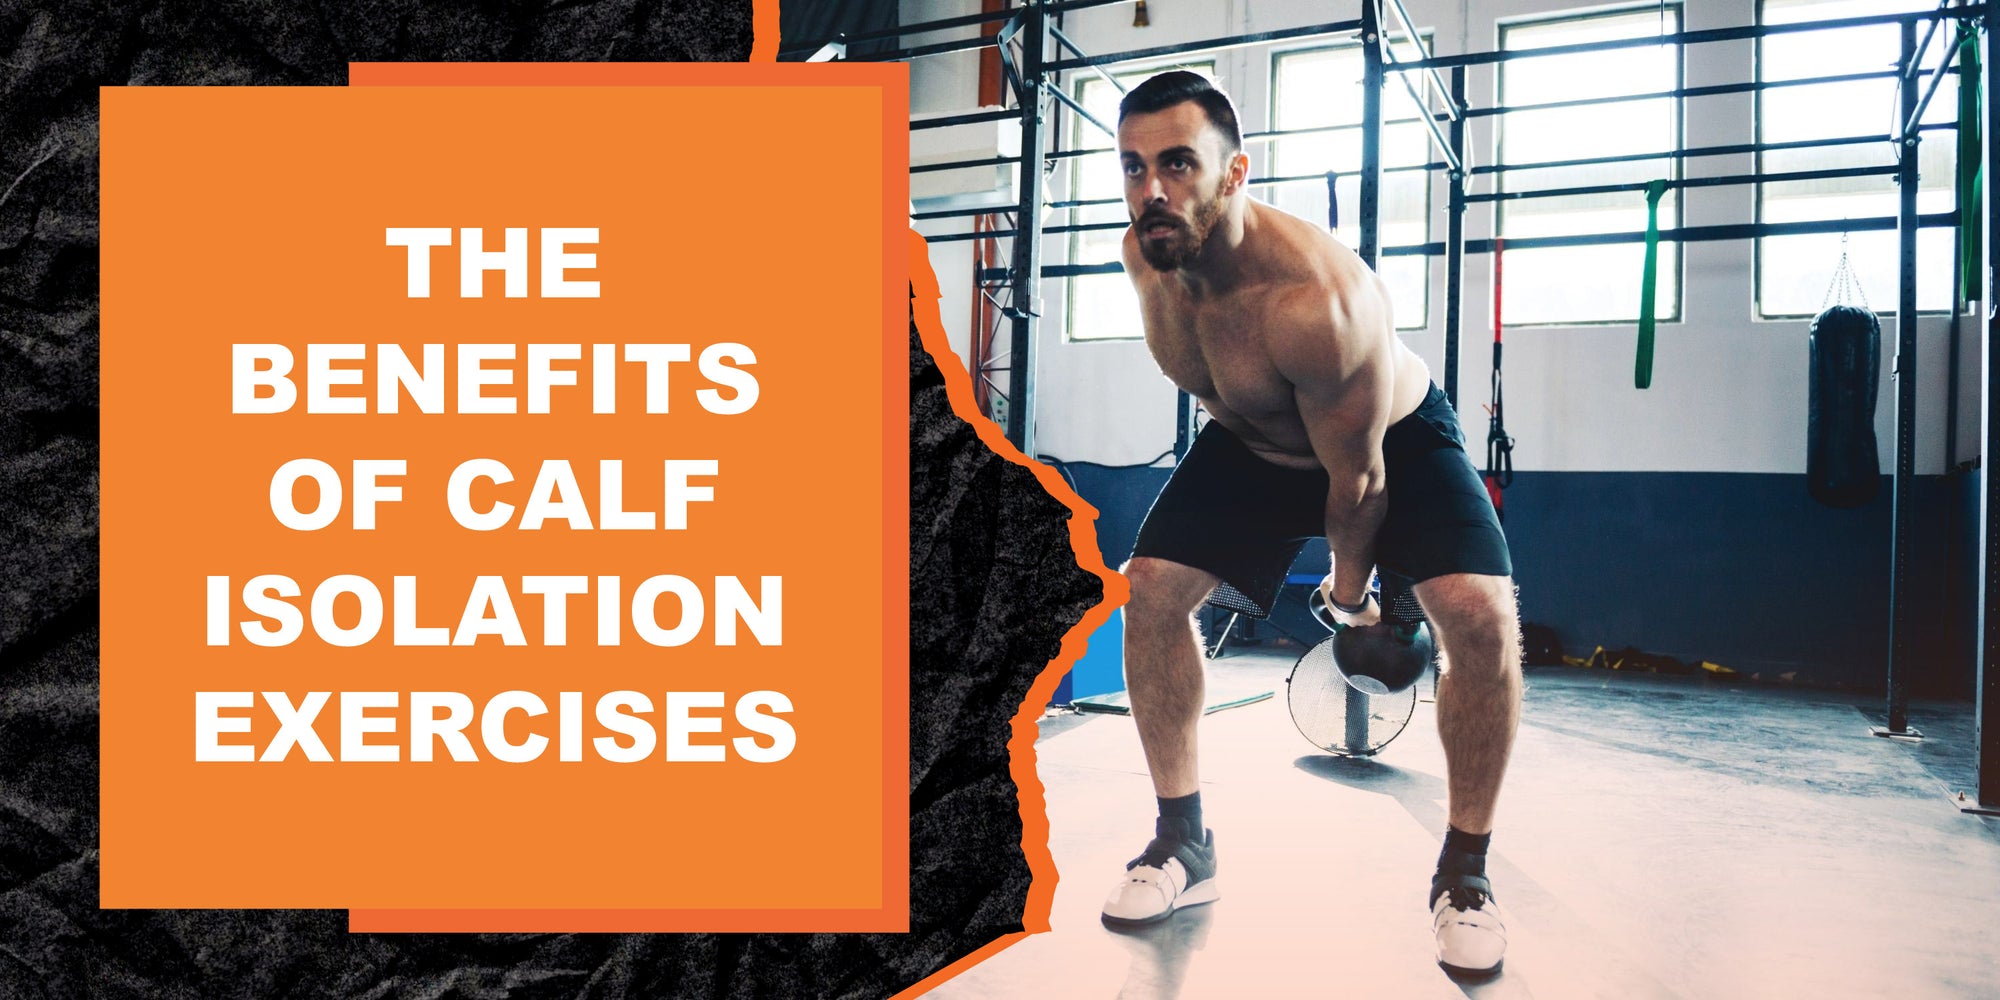 The Benefits of Calf Isolation Exercises